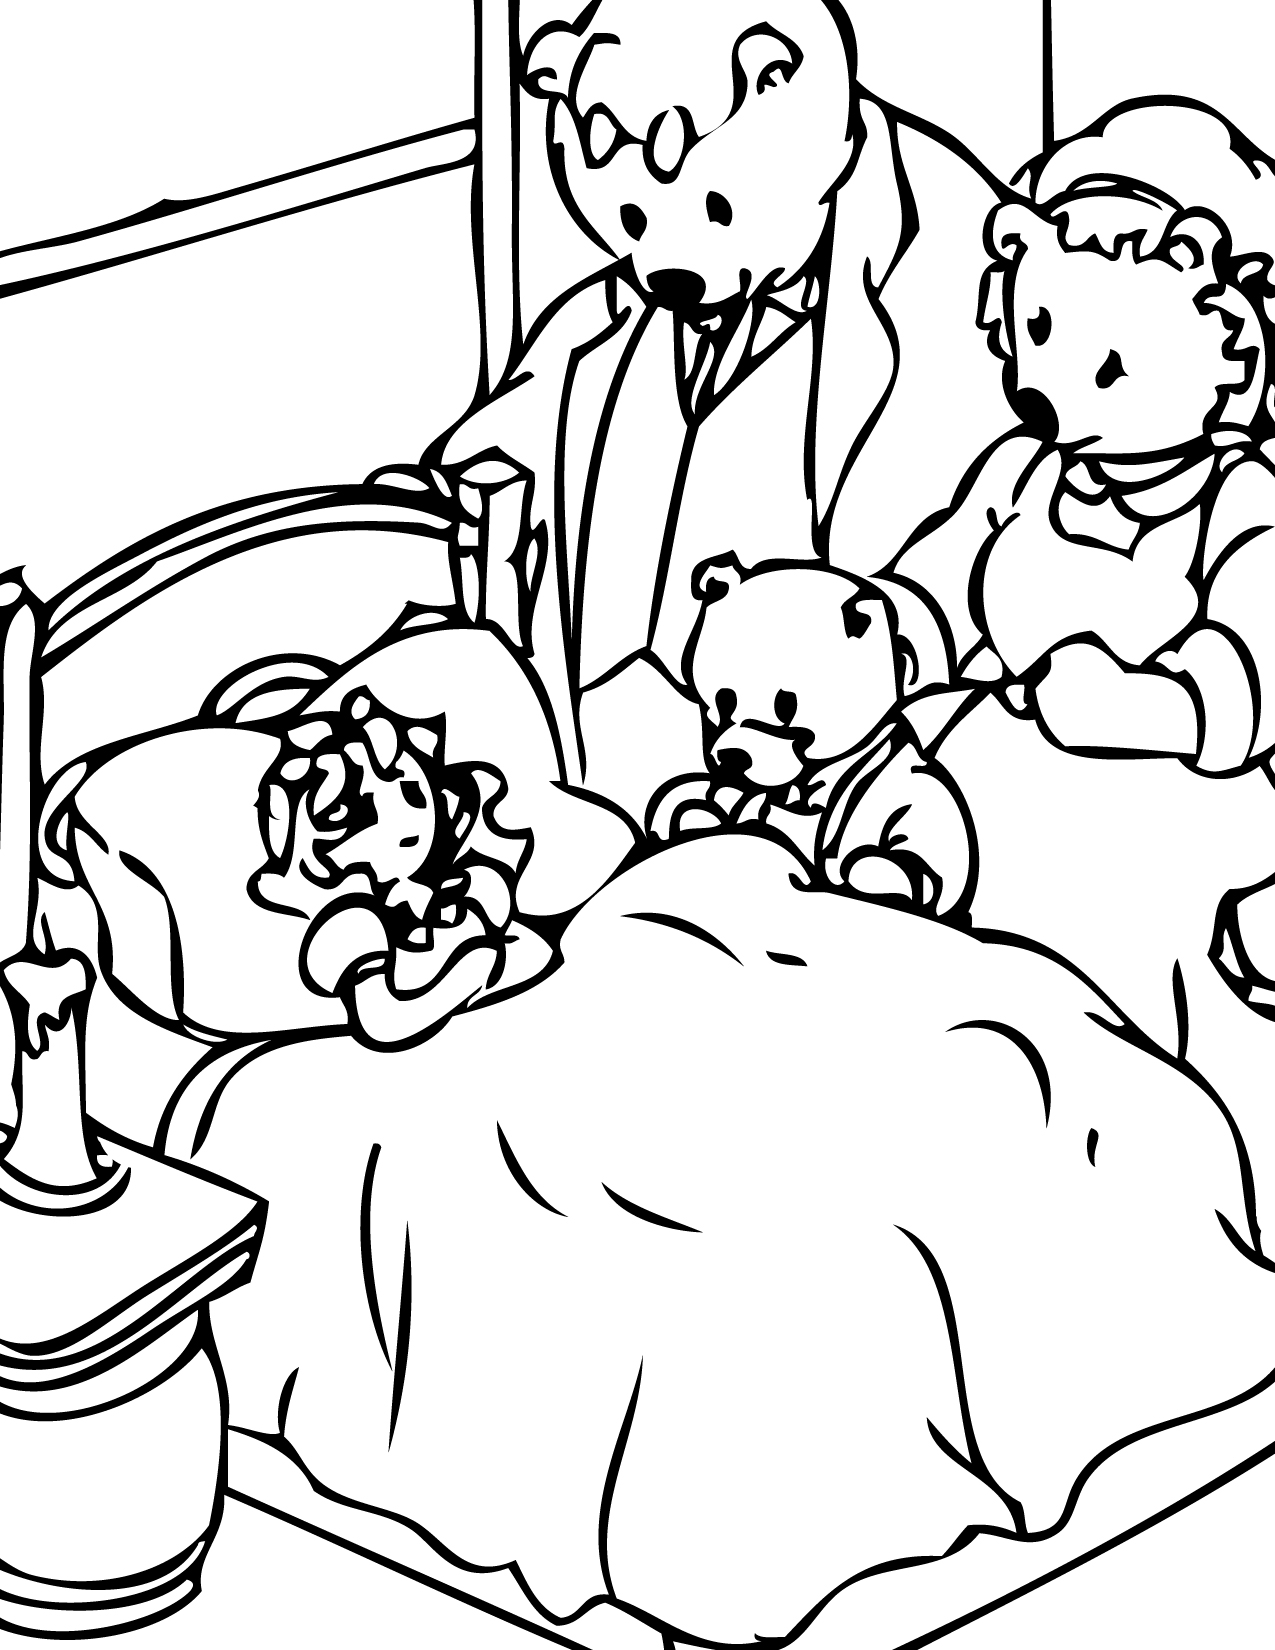 Three Little Bears Coloring Pages Coloring Pages